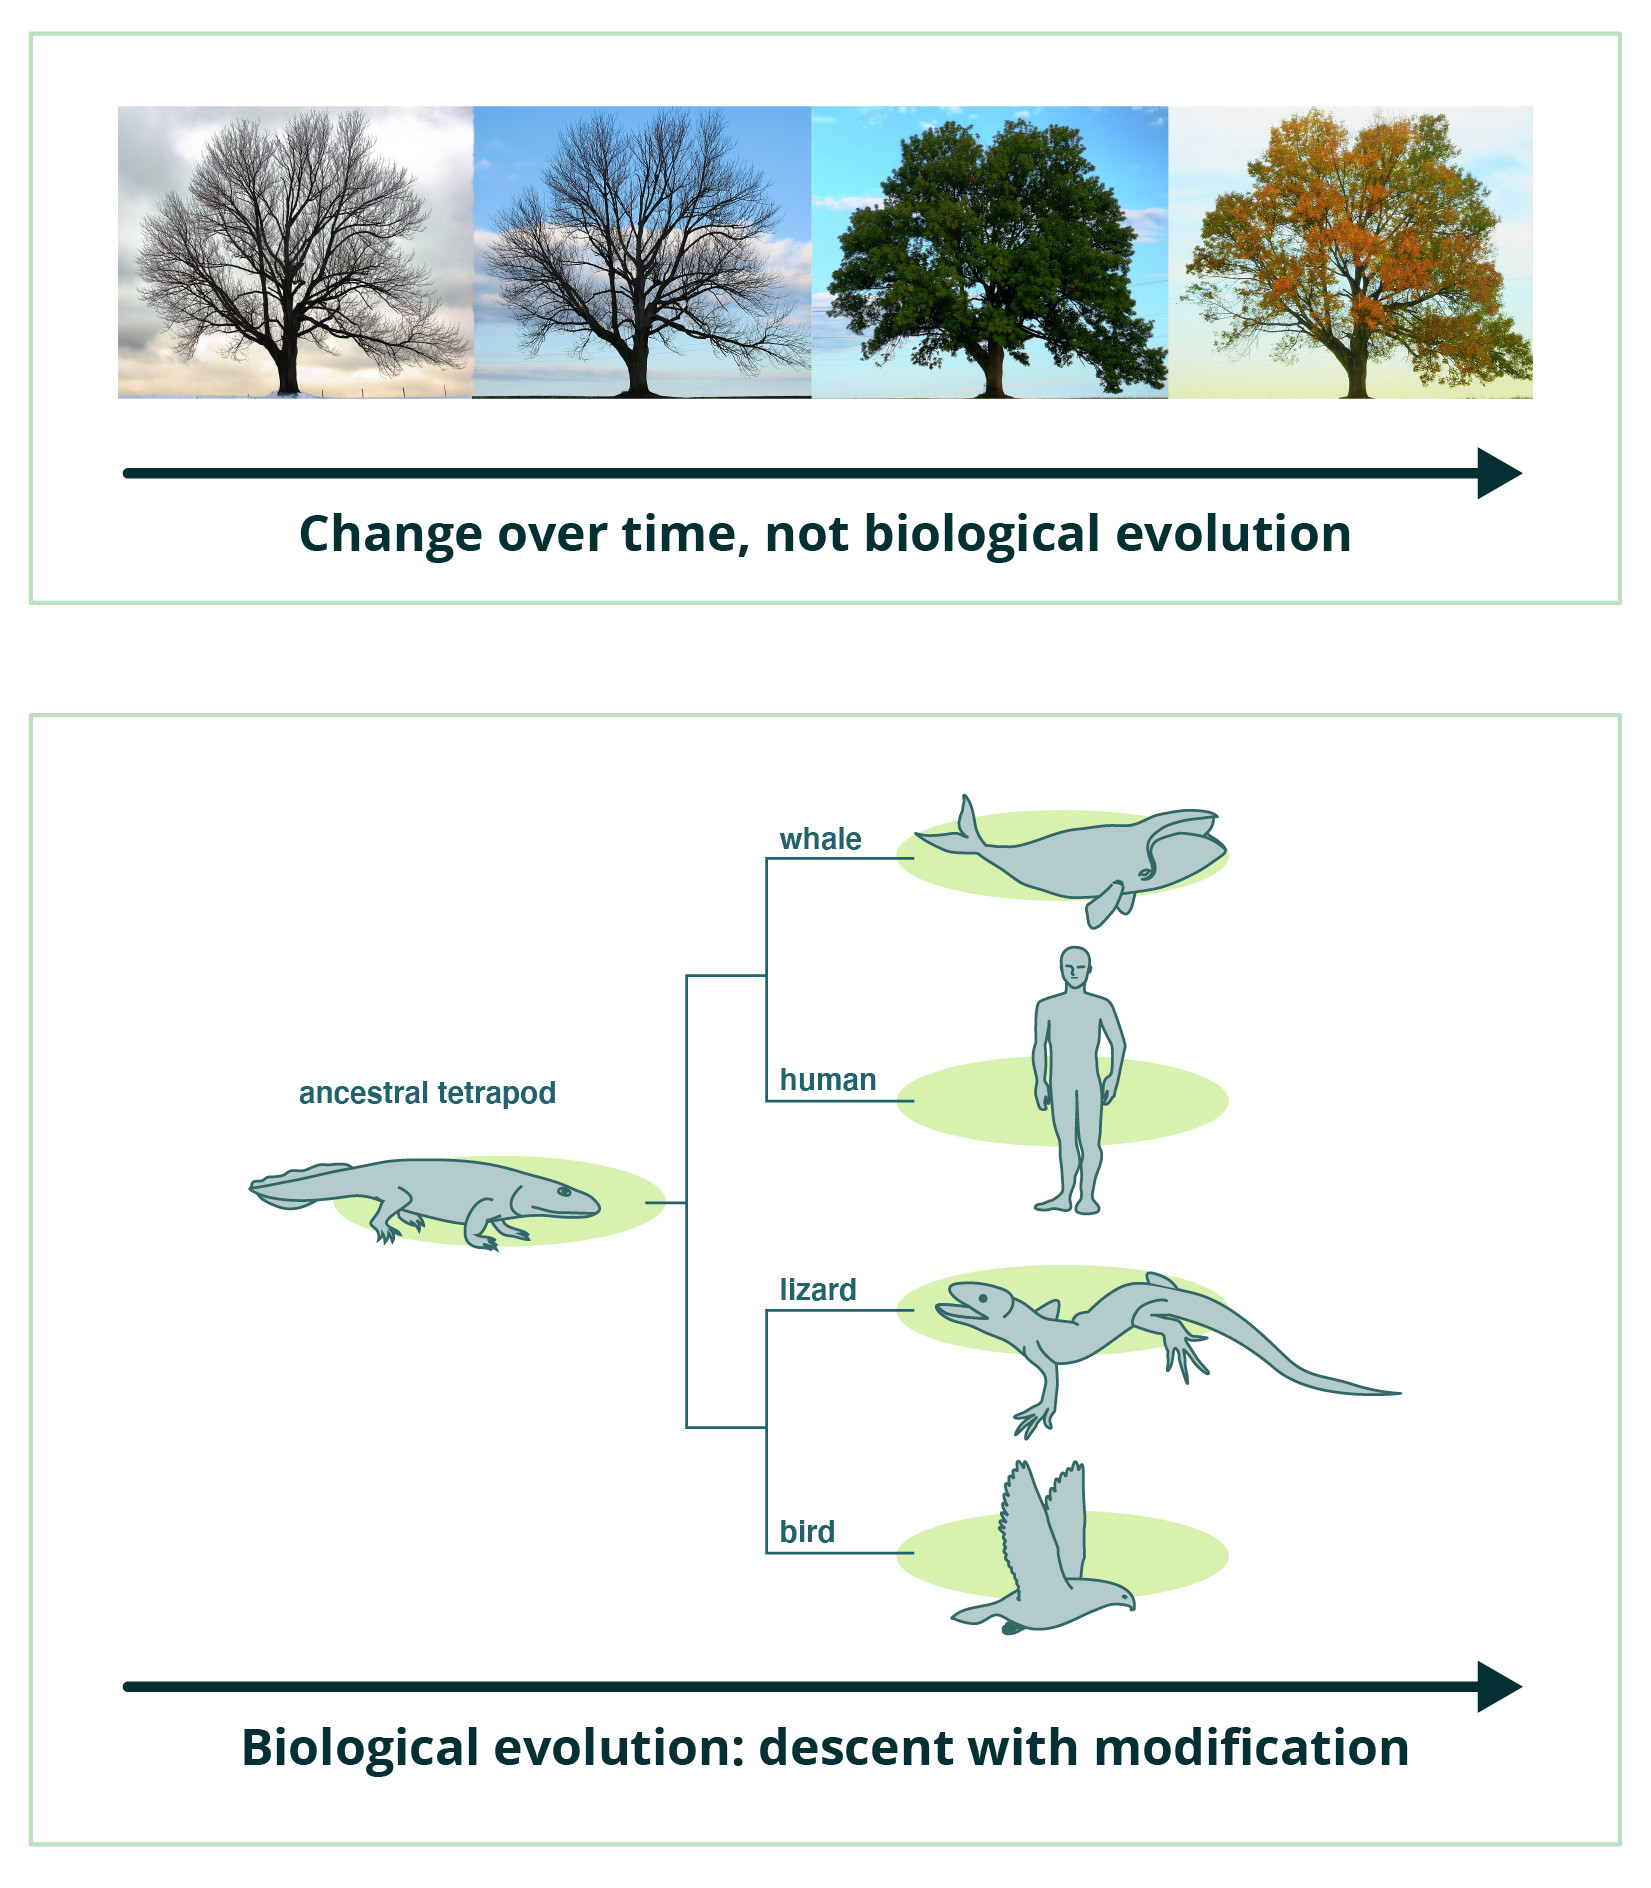 Above, a series of photos of the same tree throughout the four seasons, showing change over time. The tree on the left is barren (winter), left-middle is spring, right-middle is summer, and right is autumn. Below is a phylogeny showing a whale, a human, a bird, and a lizard with their common ancestor, the ancestral tetrapod. It is titled biological evolution: descent with modification.